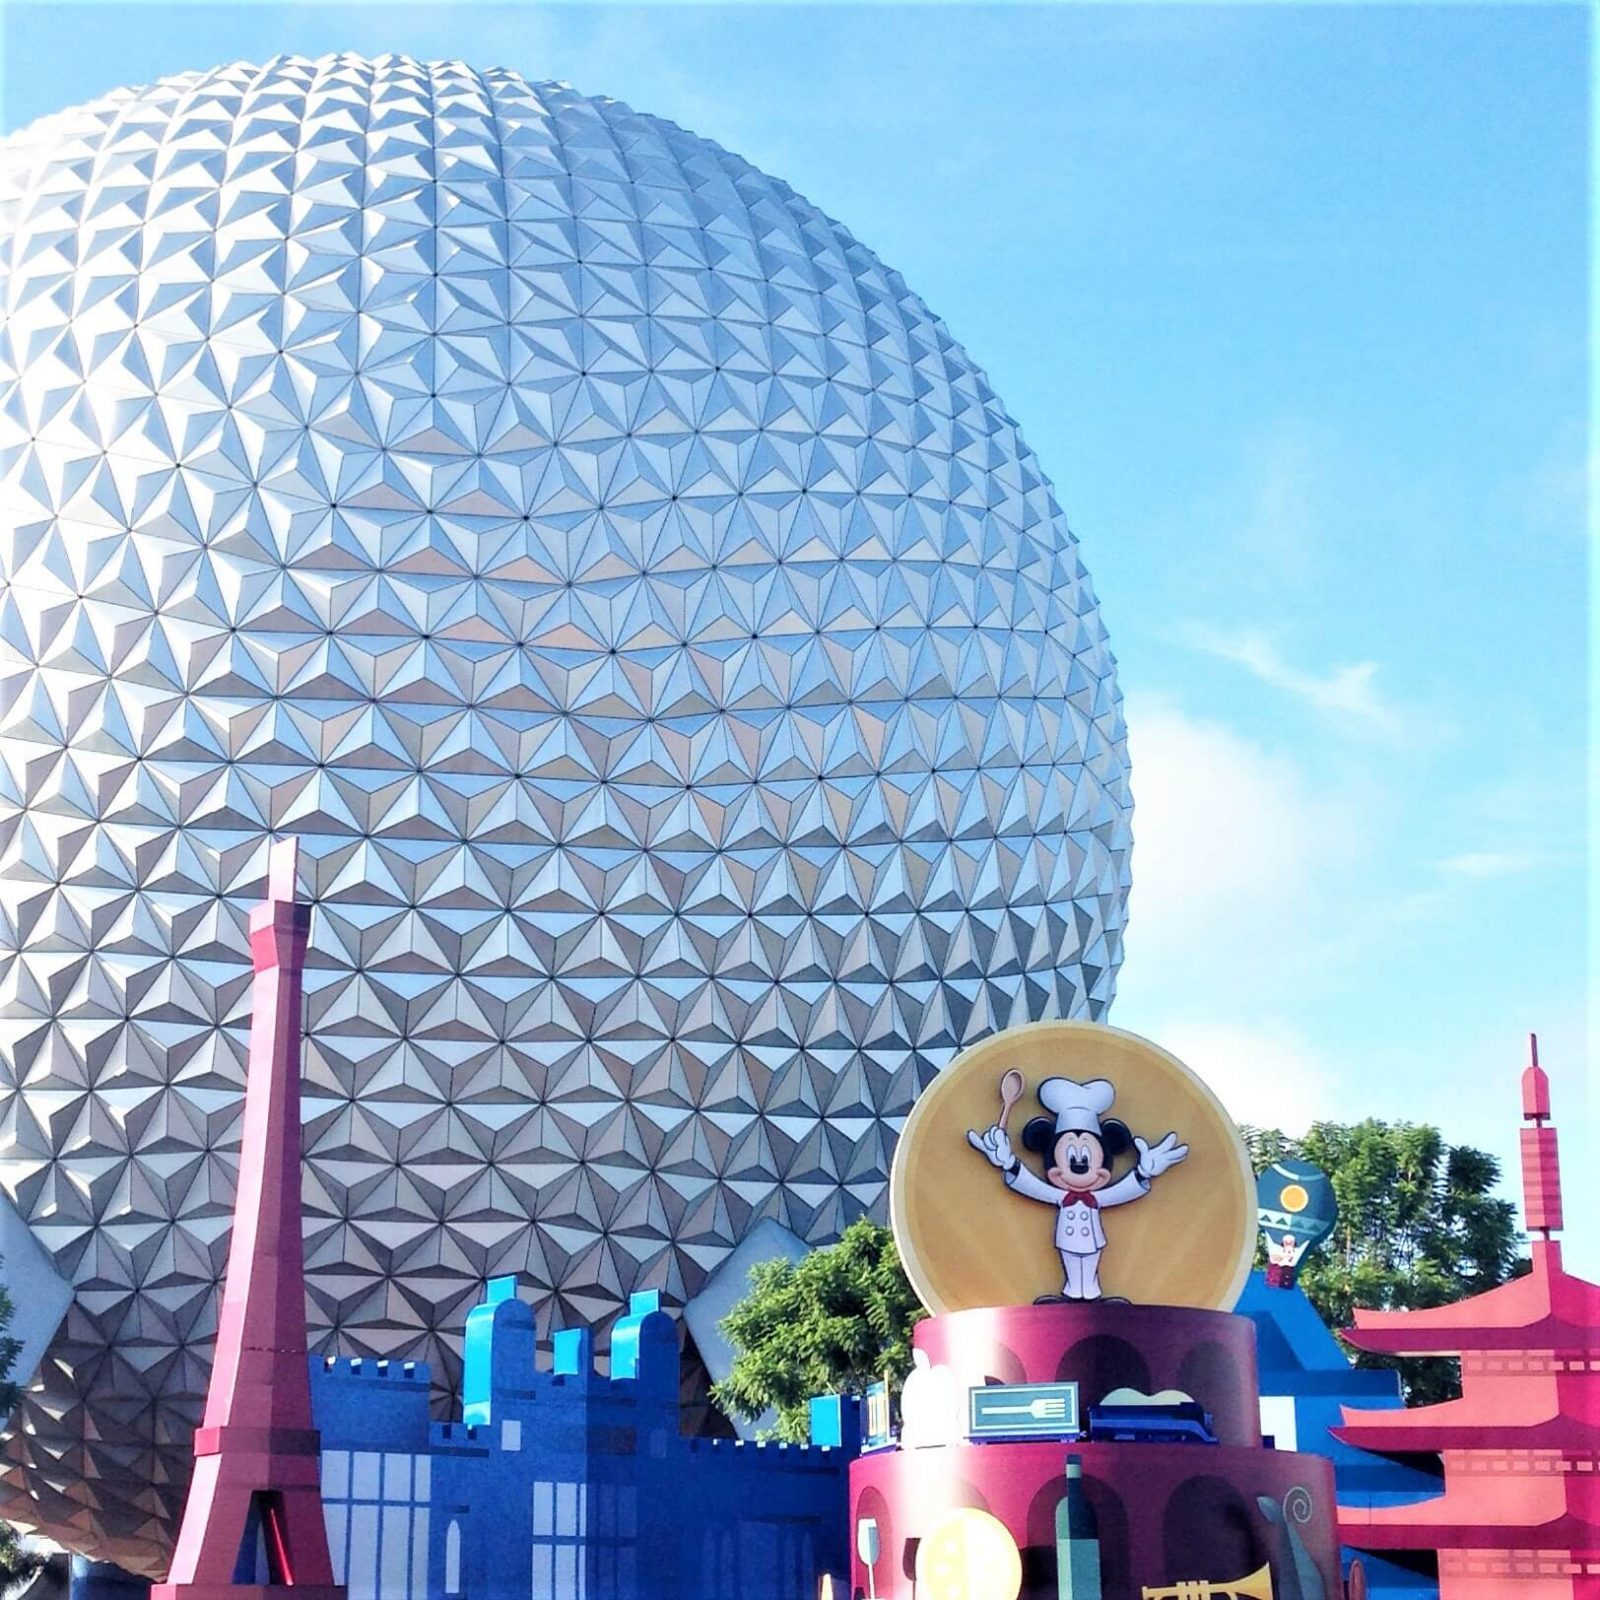 Epcot's Spaceship Earth during Food & Wine Festival